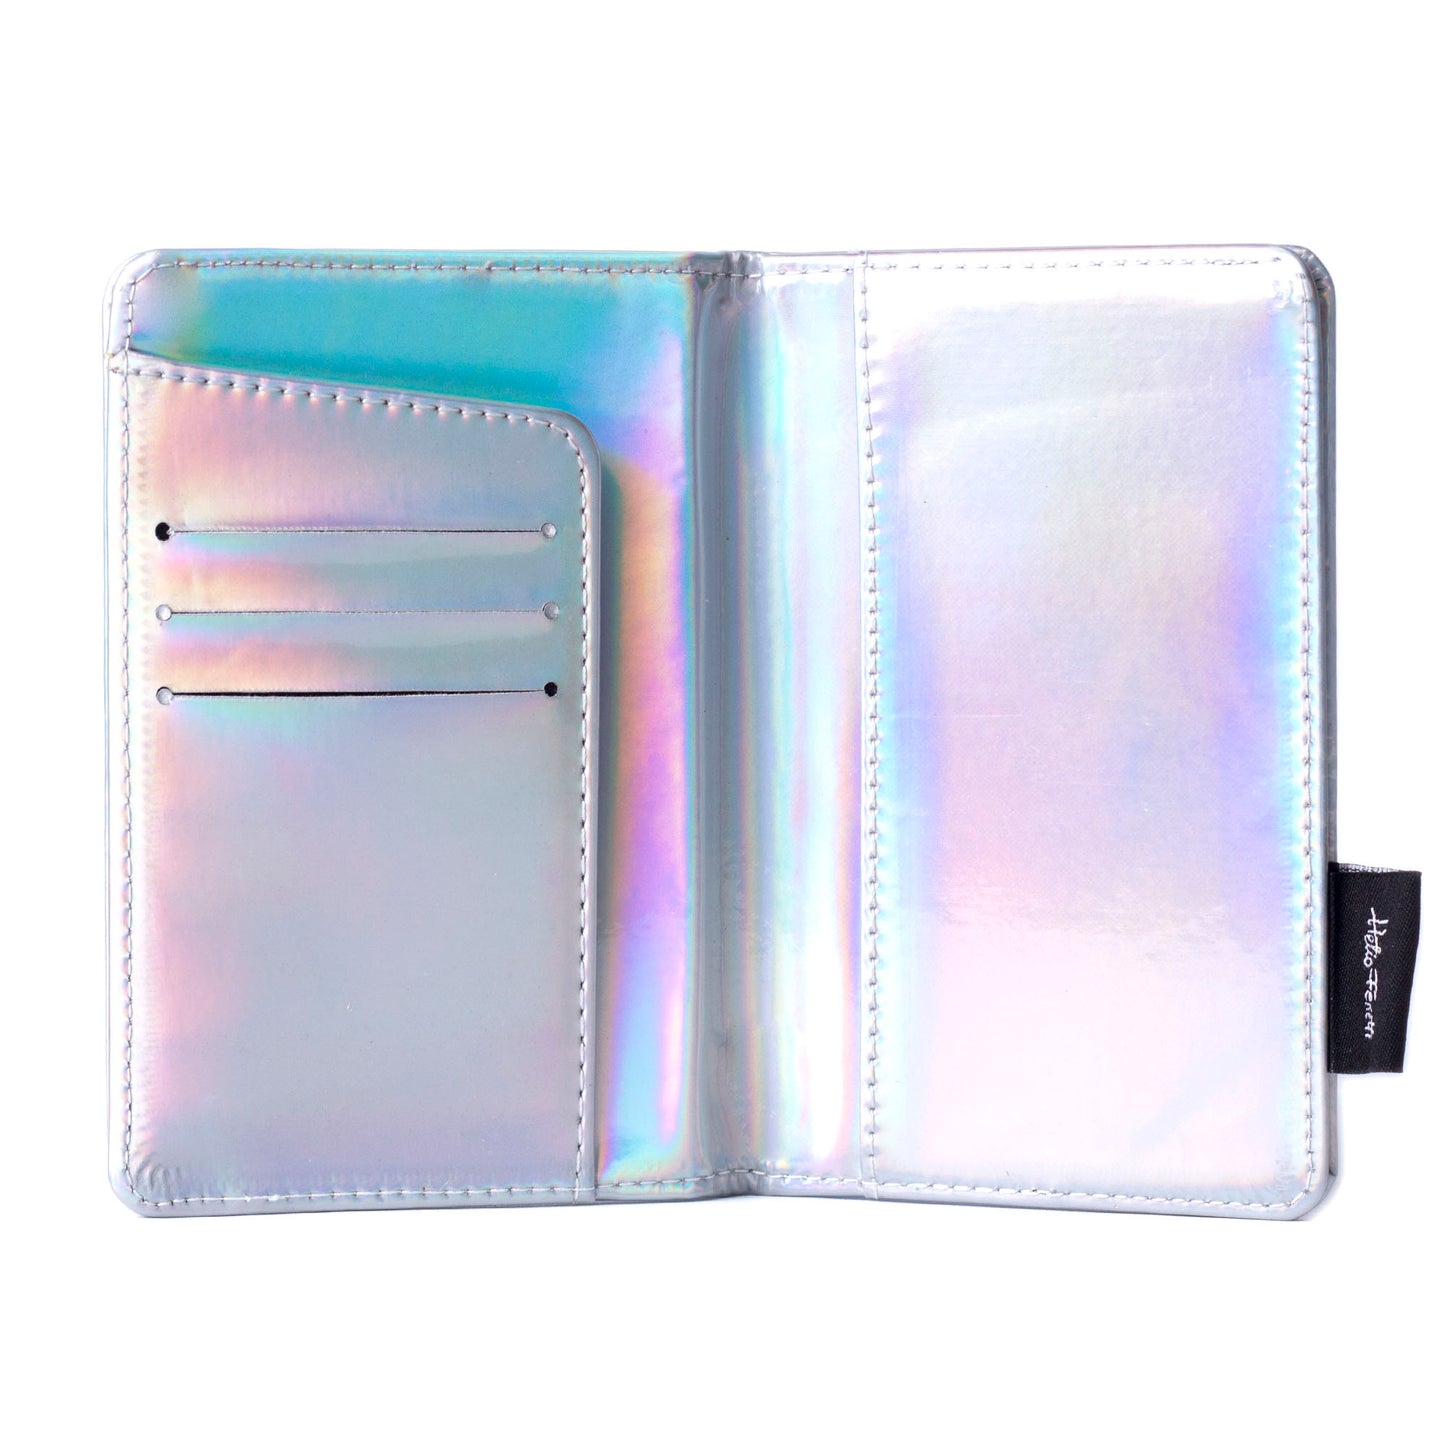 Stay Weird Passport Cover - Holographic